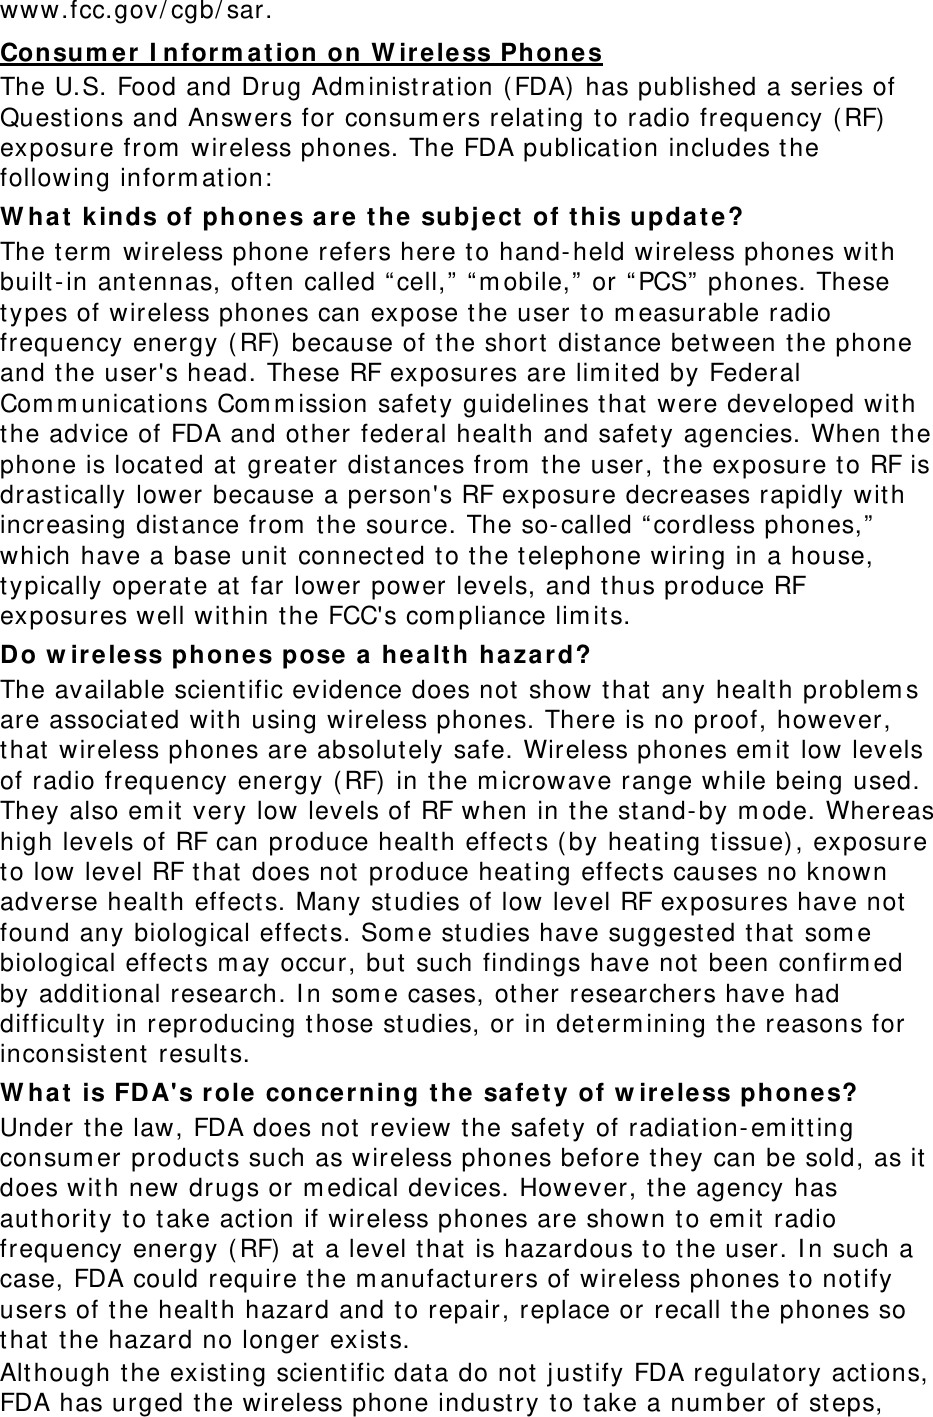 www.fcc.gov/ cgb/ sar. Consum er I nform a tion on W irele ss Phones The U.S. Food and Drug Adm inist ration ( FDA)  has published a series of Quest ions and Answers for consum ers relating t o radio frequency ( RF) exposure from  wireless phones. The FDA publication includes the following inform at ion:  W ha t k in ds of phones ar e  t he subj ect  of t his upda t e? The t erm  wireless phone refers here to hand- held wireless phones with built- in antennas, oft en called “ cell,”  “ m obile,”  or “ PCS”  phones. These types of wireless phones can expose t he user t o m easurable radio frequency energy ( RF) because of t he short  dist ance between the phone and the user&apos;s head. These RF exposures are lim ited by Federal Com m unications Com m ission safet y guidelines that  were developed wit h the advice of FDA and other federal health and safet y agencies. When t he phone is located at greater distances from  t he user, t he exposure to RF is drast ically lower because a person&apos;s RF exposure decreases rapidly wit h increasing dist ance from  t he source. The so- called “ cordless phones,”  which have a base unit connect ed t o t he t elephone wiring in a house, typically operate at far lower power levels, and thus produce RF exposures well within the FCC&apos;s com pliance lim its. Do w ireless phones pose  a  hea lt h ha zard? The available scient ific evidence does not show t hat any health problem s are associated with using wireless phones. There is no proof, however, that  wireless phones are absolutely safe. Wireless phones em it low levels of radio frequency energy ( RF)  in t he m icrowave range while being used. They also em it  very low levels of RF when in t he stand- by m ode. Whereas high levels of RF can produce health effect s ( by heat ing t issue), exposure to low level RF that  does not produce heat ing effect s causes no known adverse health effects. Many st udies of low level RF exposures have not found any biological effect s. Som e studies have suggest ed t hat som e biological effect s m ay occur, but  such findings have not been confirm ed by additional research. I n som e cases, other researchers have had difficulty in reproducing those studies, or in determ ining t he reasons for inconsistent result s. W ha t is FDA&apos;s role  concerning t he  safet y of w ireless phon e s? Under t he law, FDA does not  review the safety of radiation-em it ting consum er products such as wireless phones before t hey can be sold, as it does with new drugs or m edical devices. However, t he agency has aut hority to t ake act ion if wireless phones are shown t o em it radio frequency energy ( RF) at a level t hat is hazardous t o the user. I n such a case, FDA could require t he m anufact urers of w ireless phones to notify users of t he health hazard and t o repair, replace or recall the phones so that  t he hazard no longer exists. Alt hough t he existing scientific data do not j ust ify FDA regulat ory act ions, FDA has urged t he wireless phone indust ry t o t ake a num ber of st eps, 